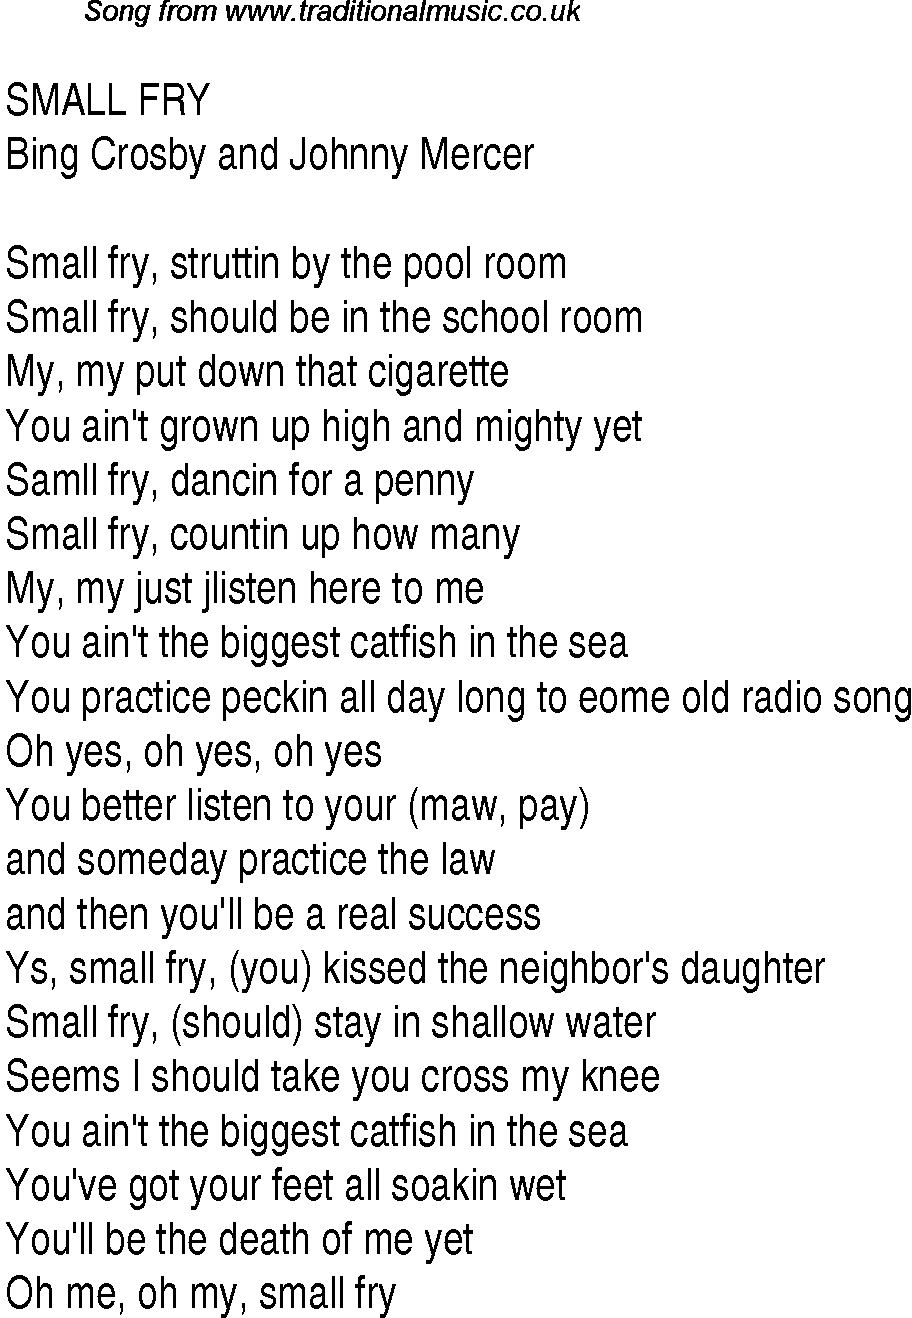 Music charts top songs 1938 - lyrics for Small Fry